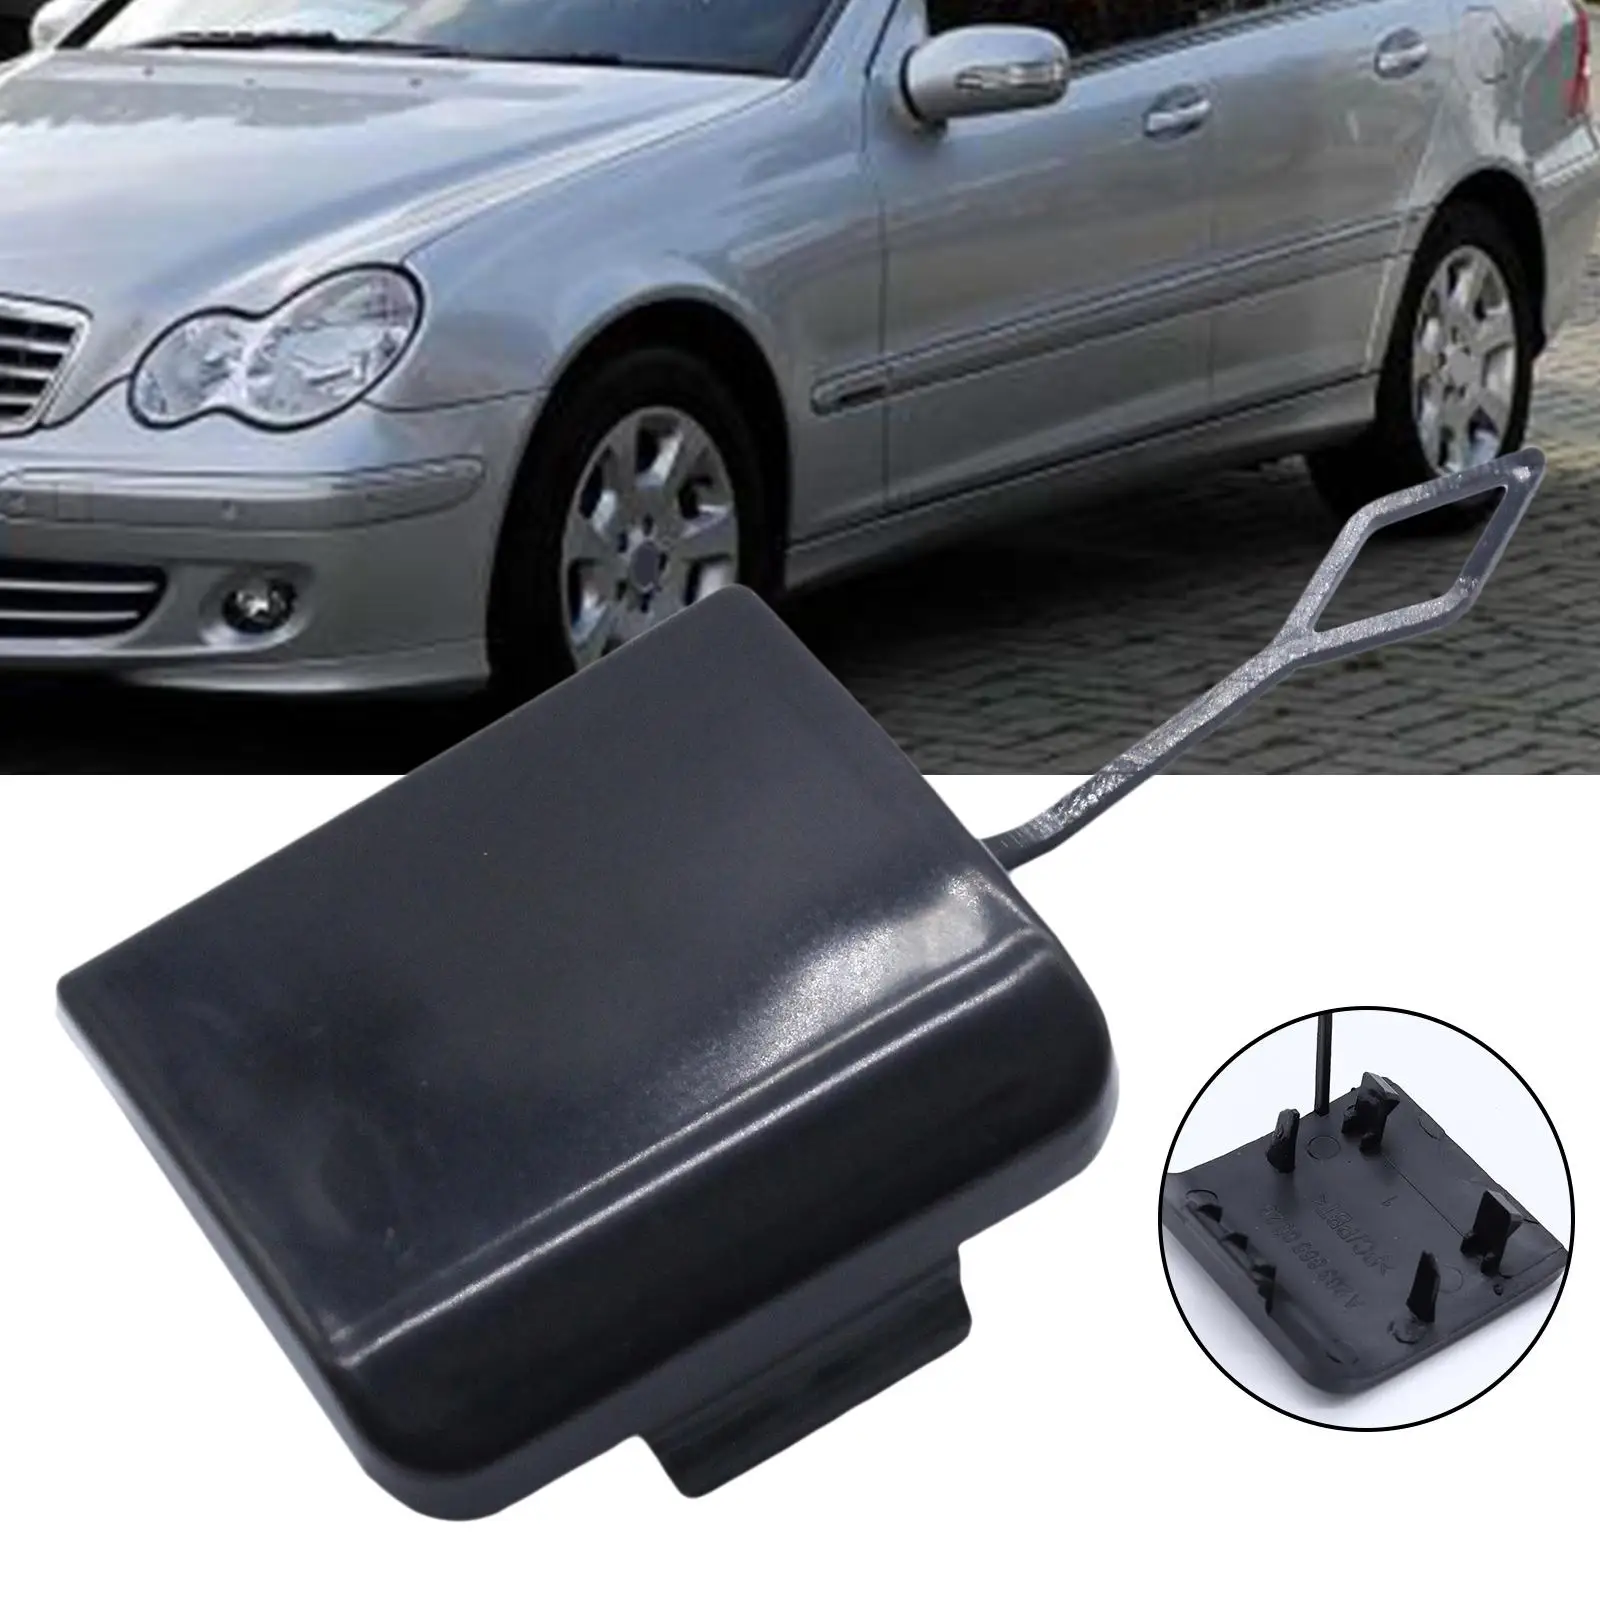 Black Front Bumper Tow Hook Cover 2038850026 Car Trailer Cover for Mercedes C-Class W203 C230 2001 to 2007 C320 C240